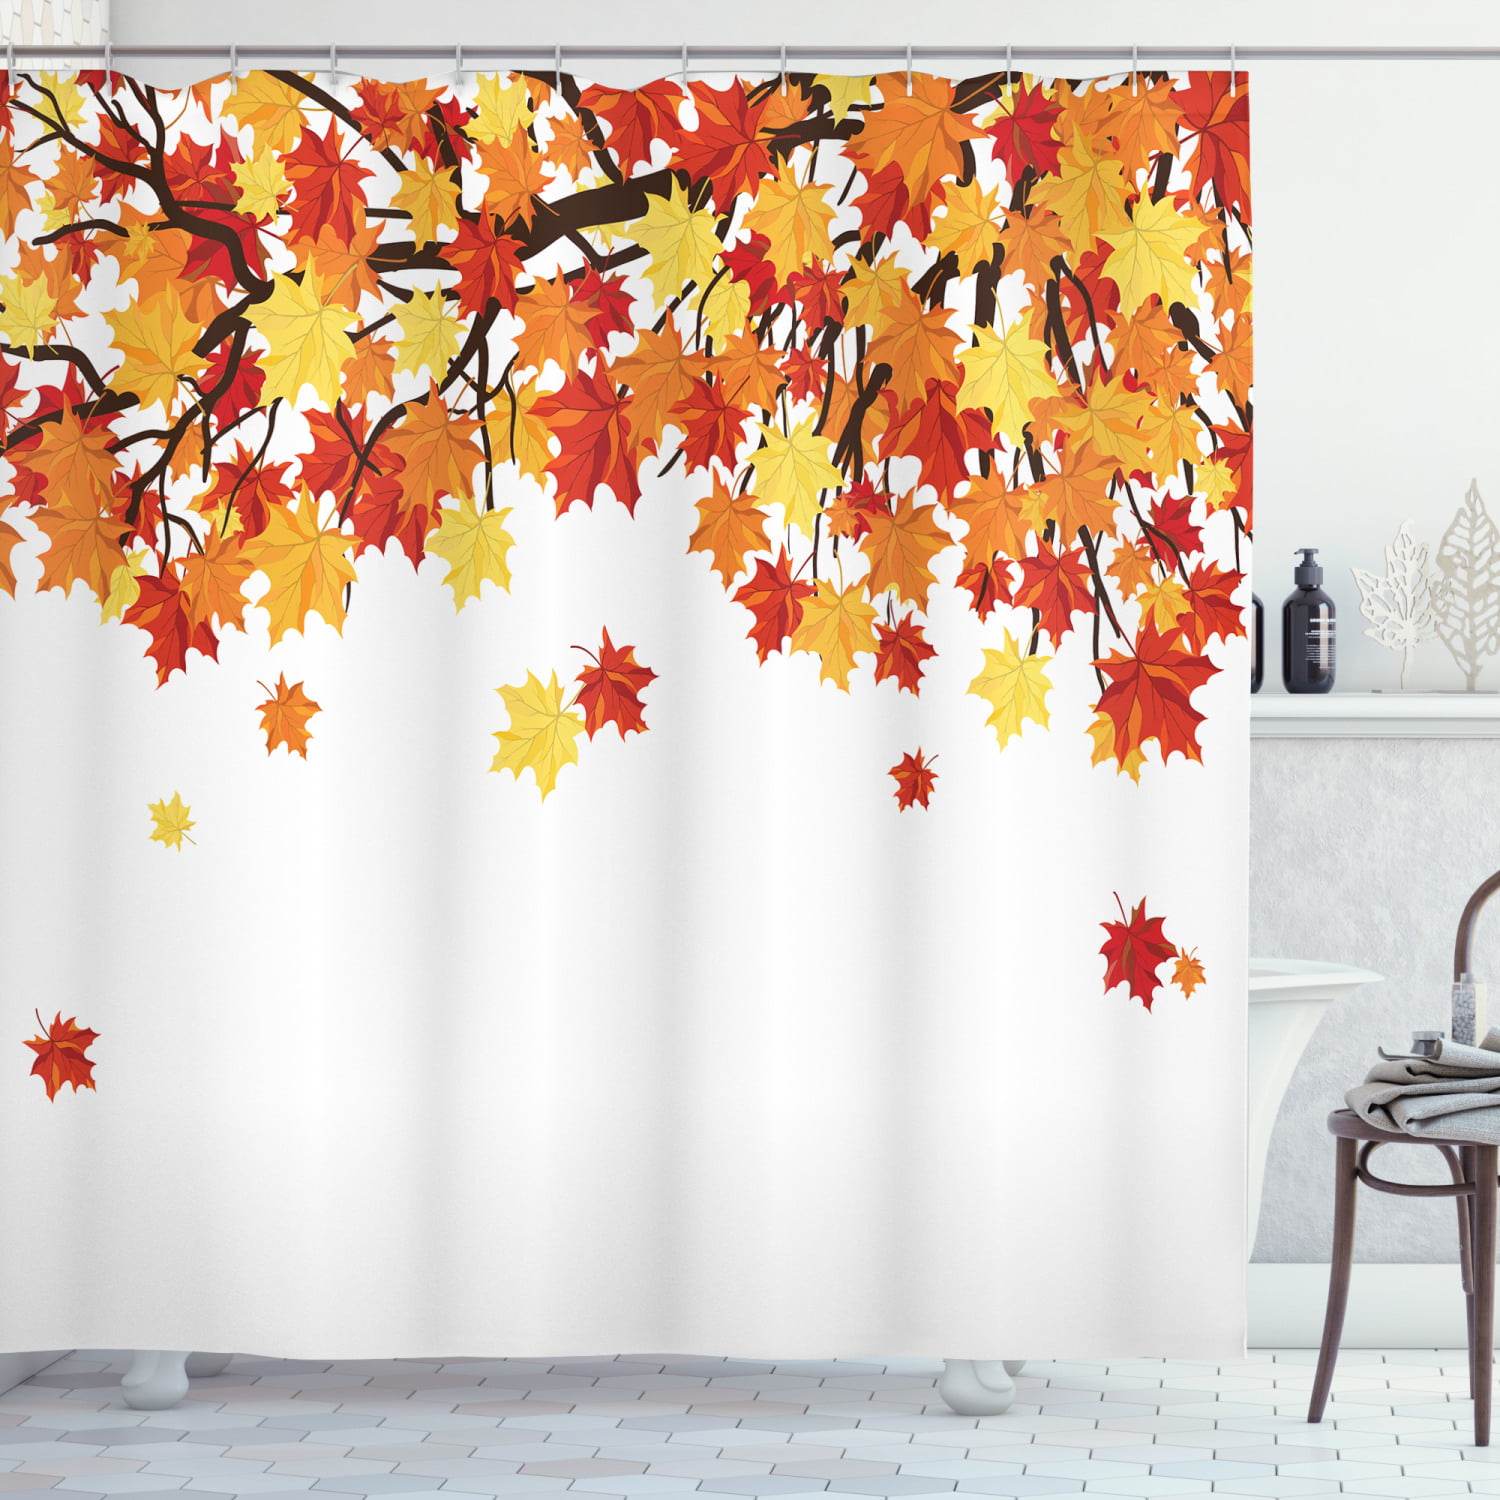 Details about   Autumn Tree Shower Curtain Fall Maple Leaves Design for Bathroom Fabric Curtain 